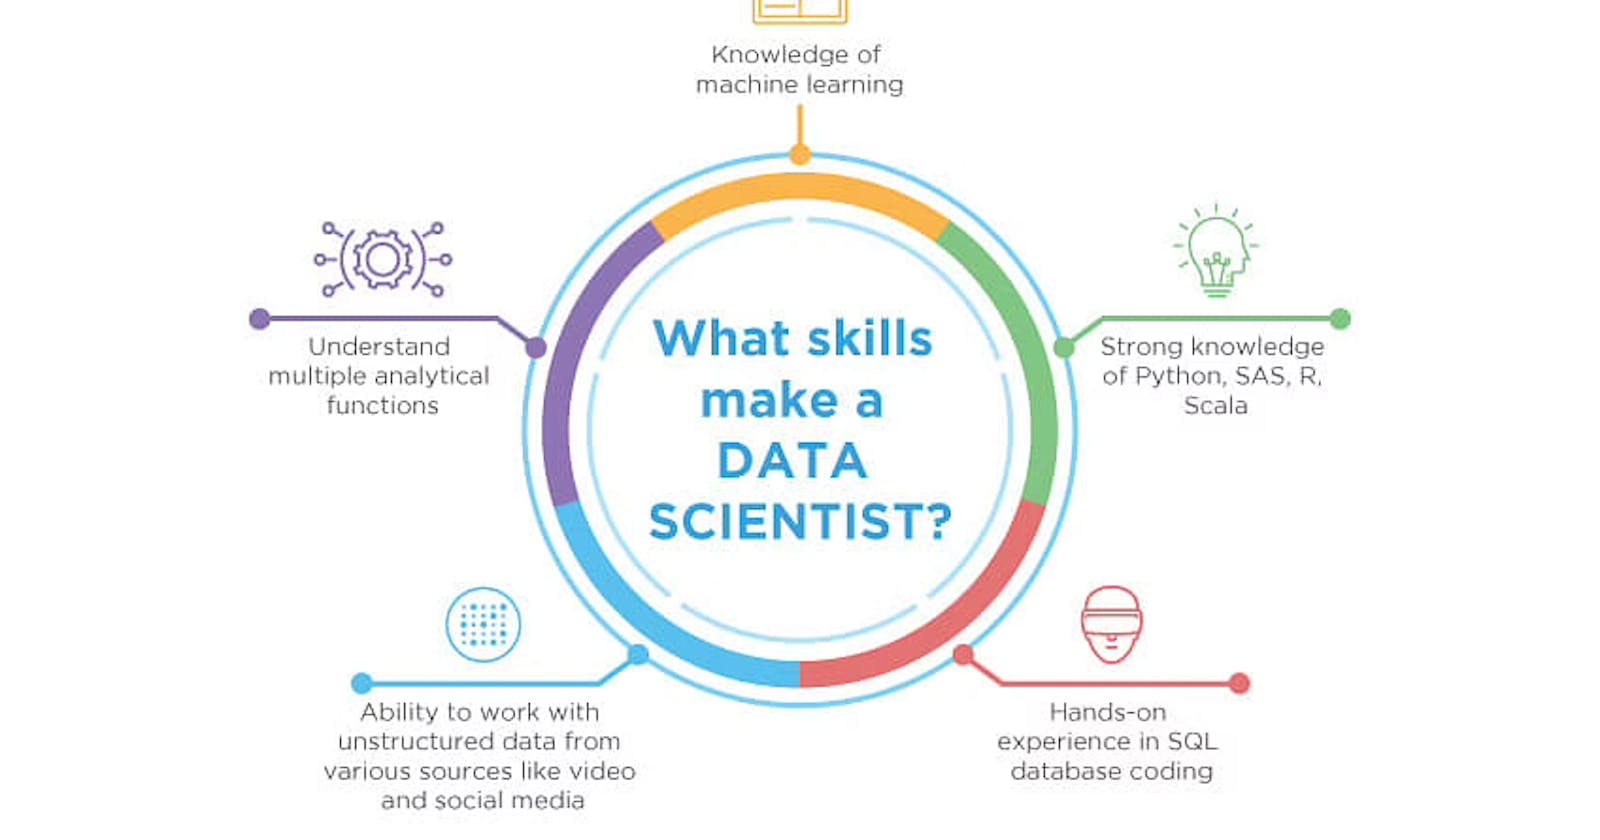 Skills required to become a data scientist